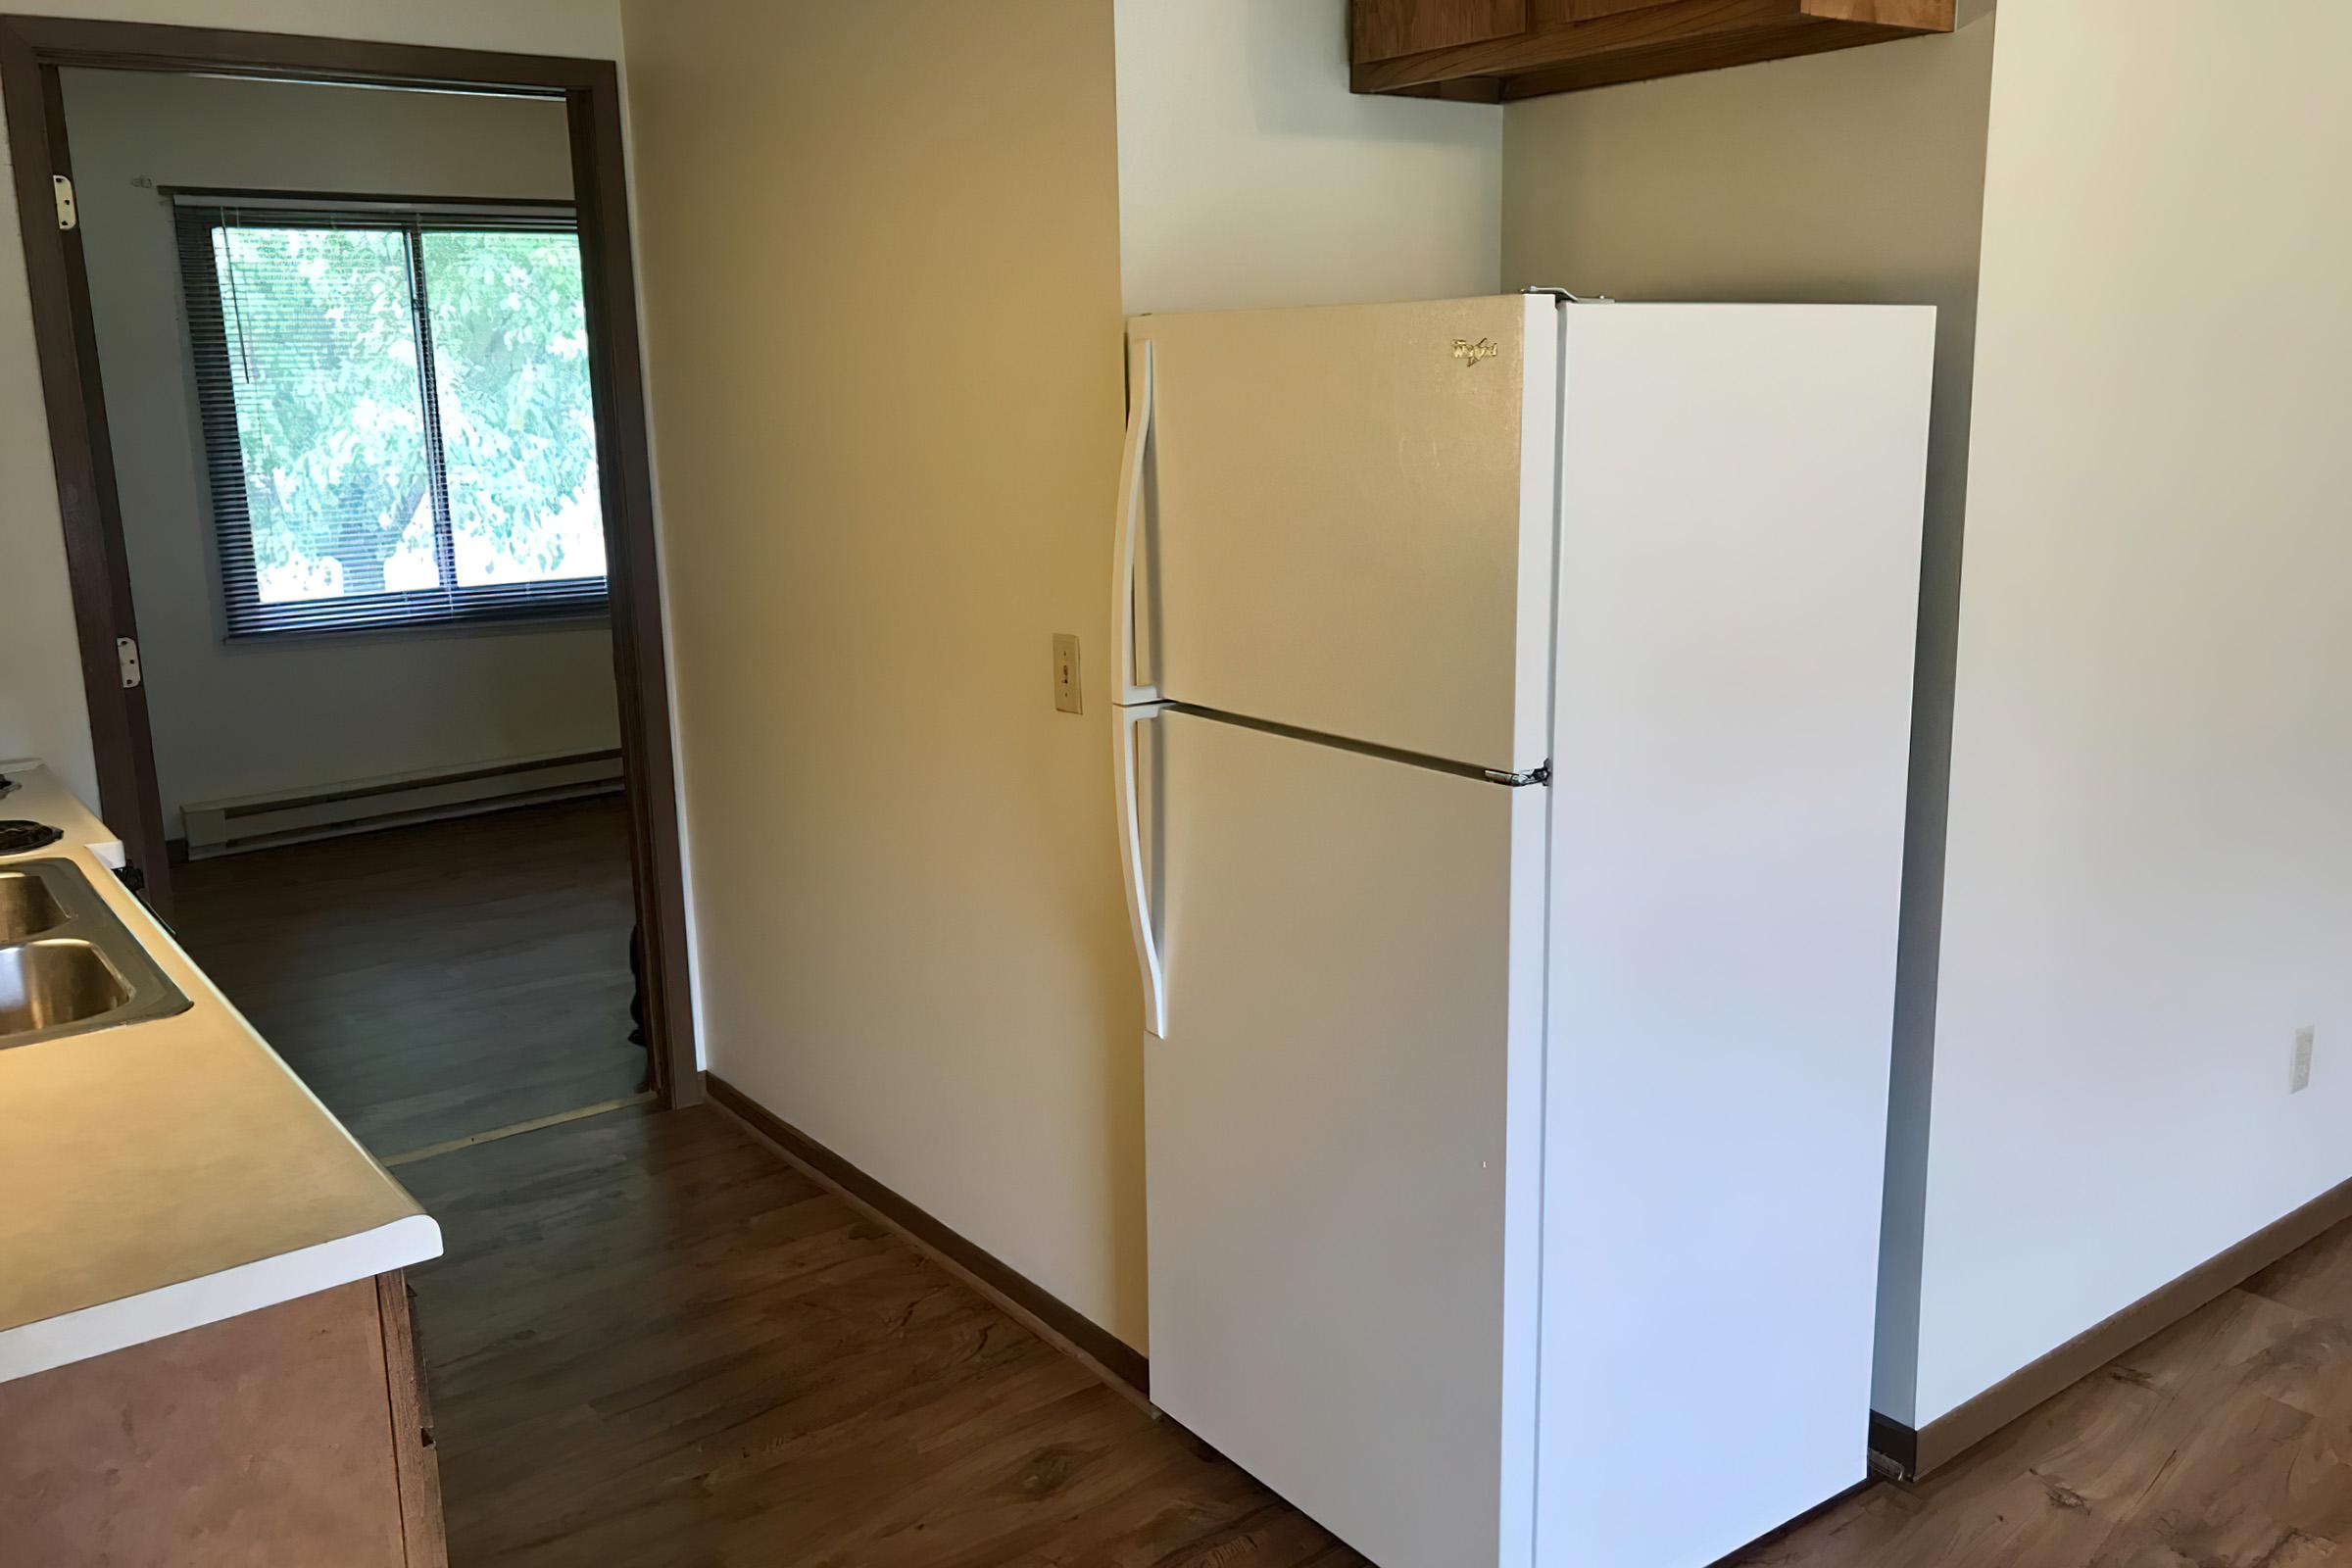 a refrigerator in a room